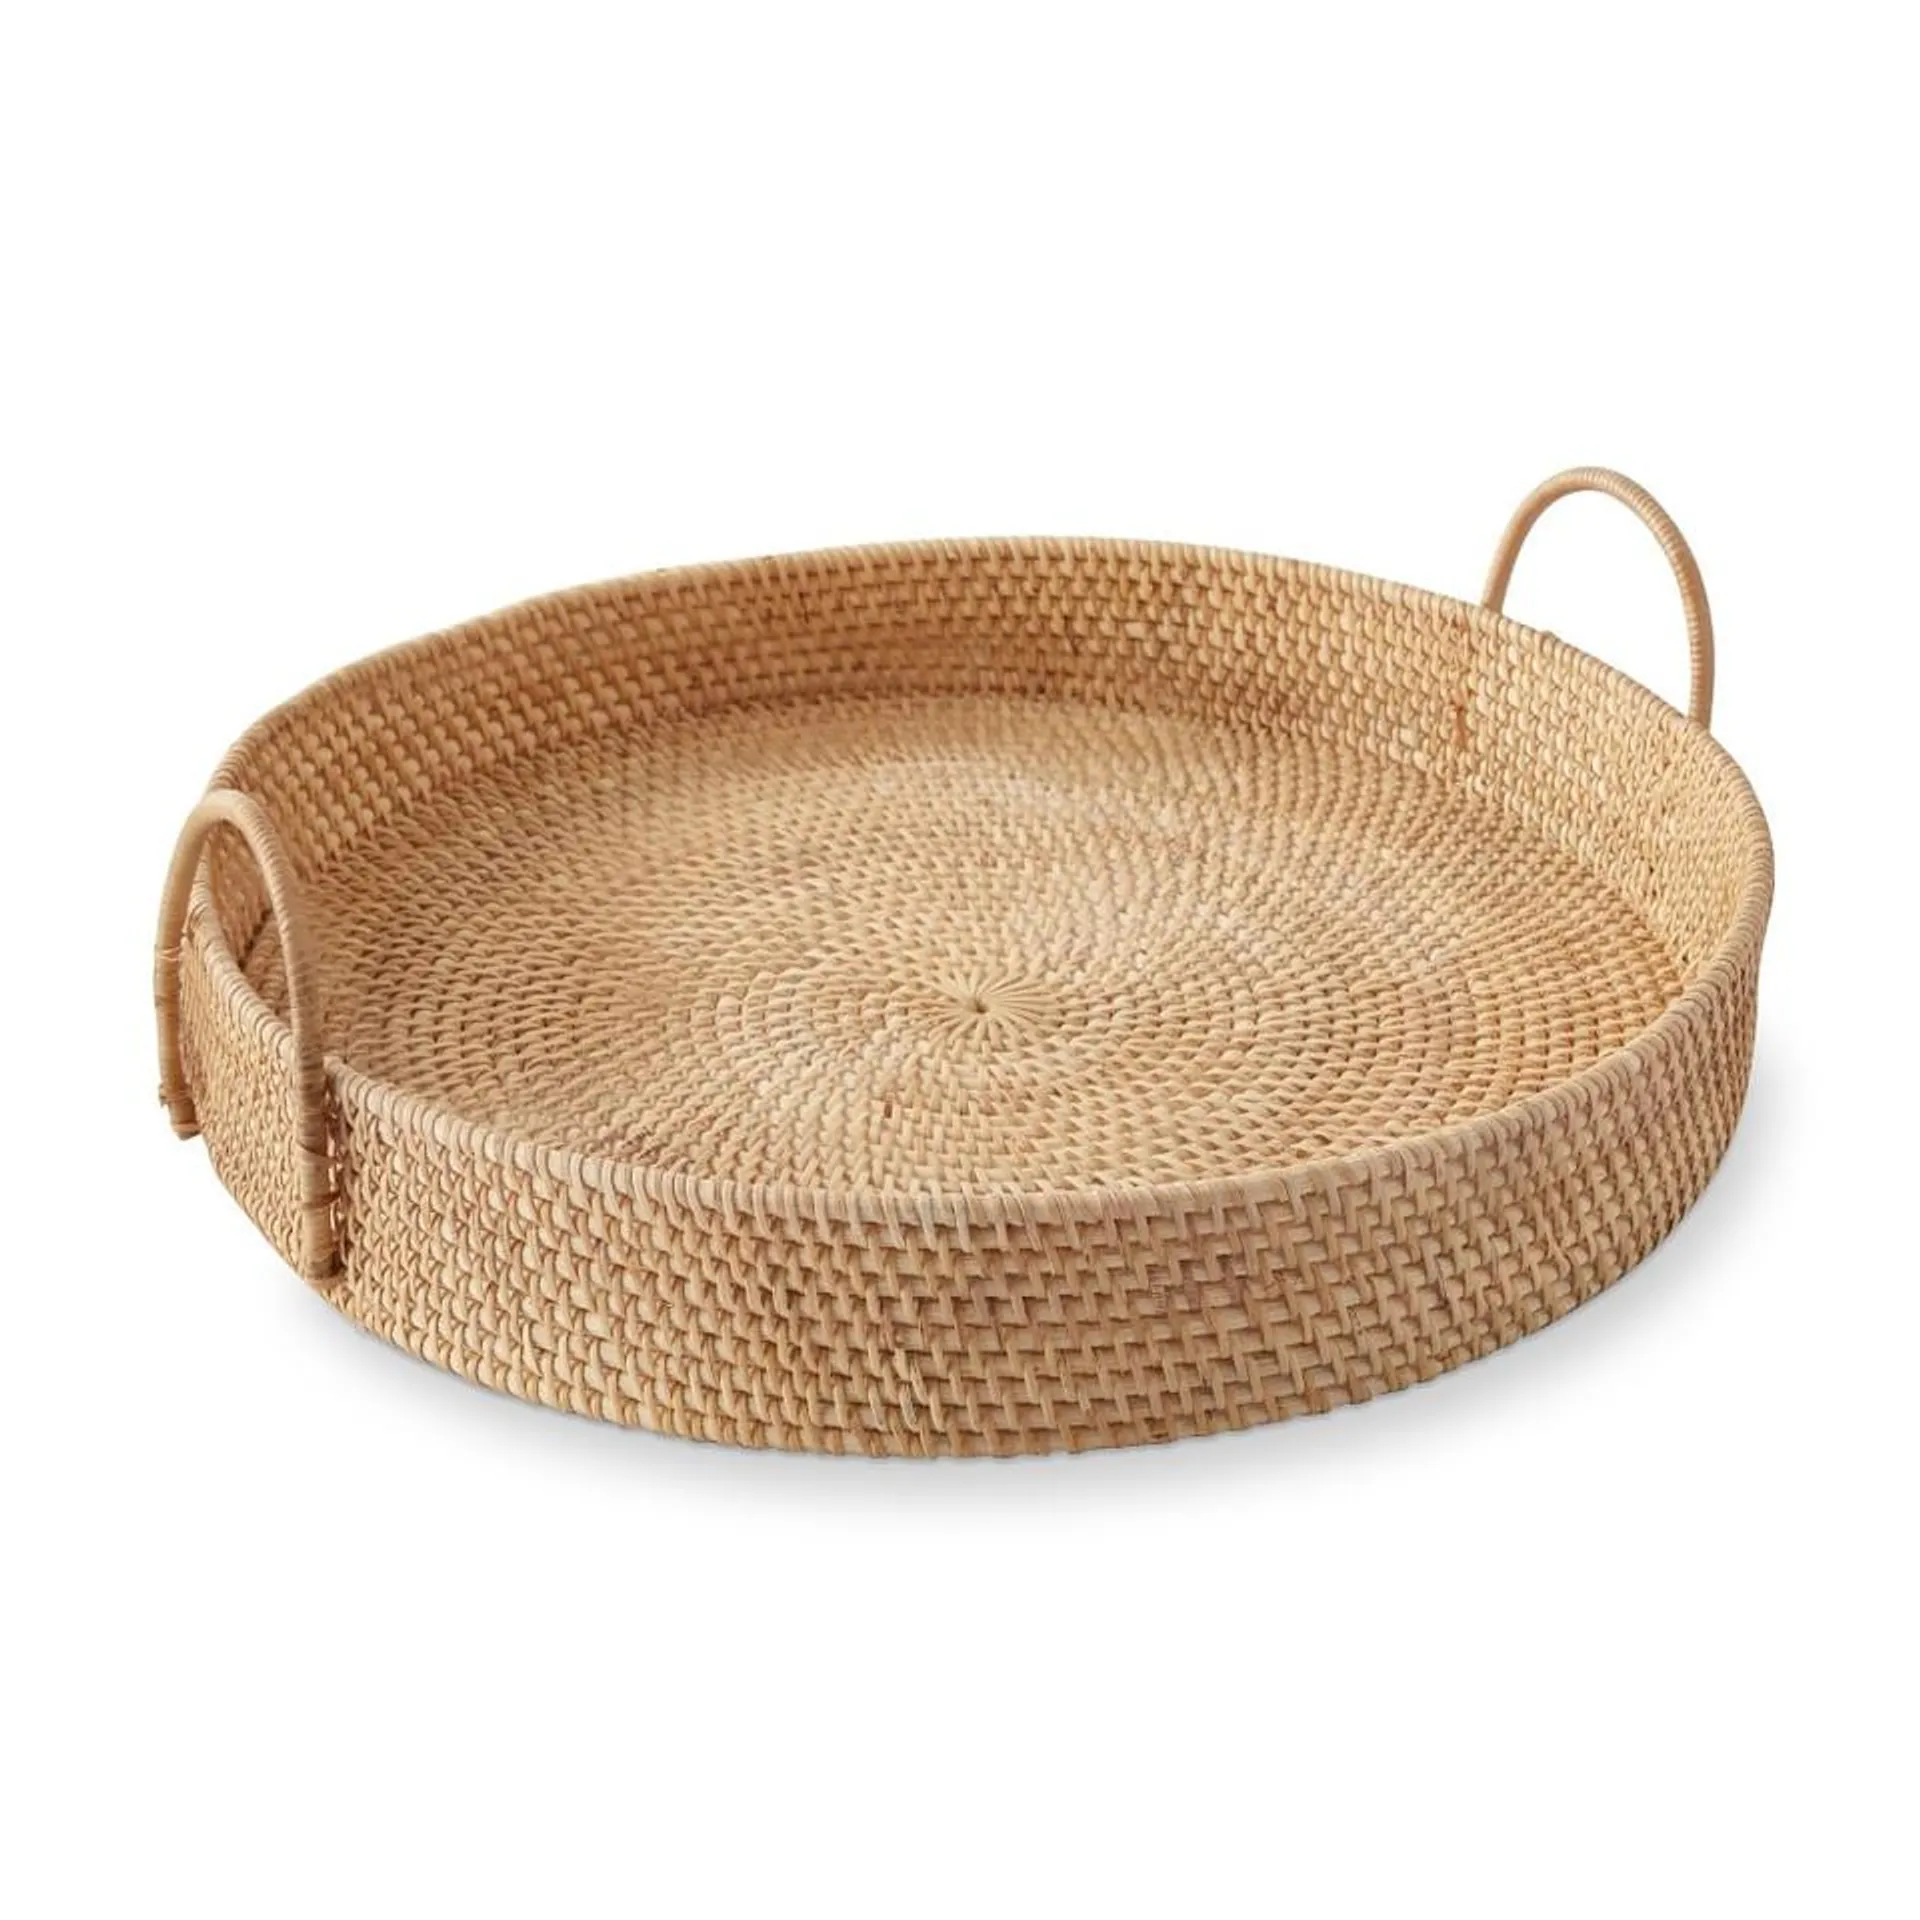 Light Woven Tray with Handles